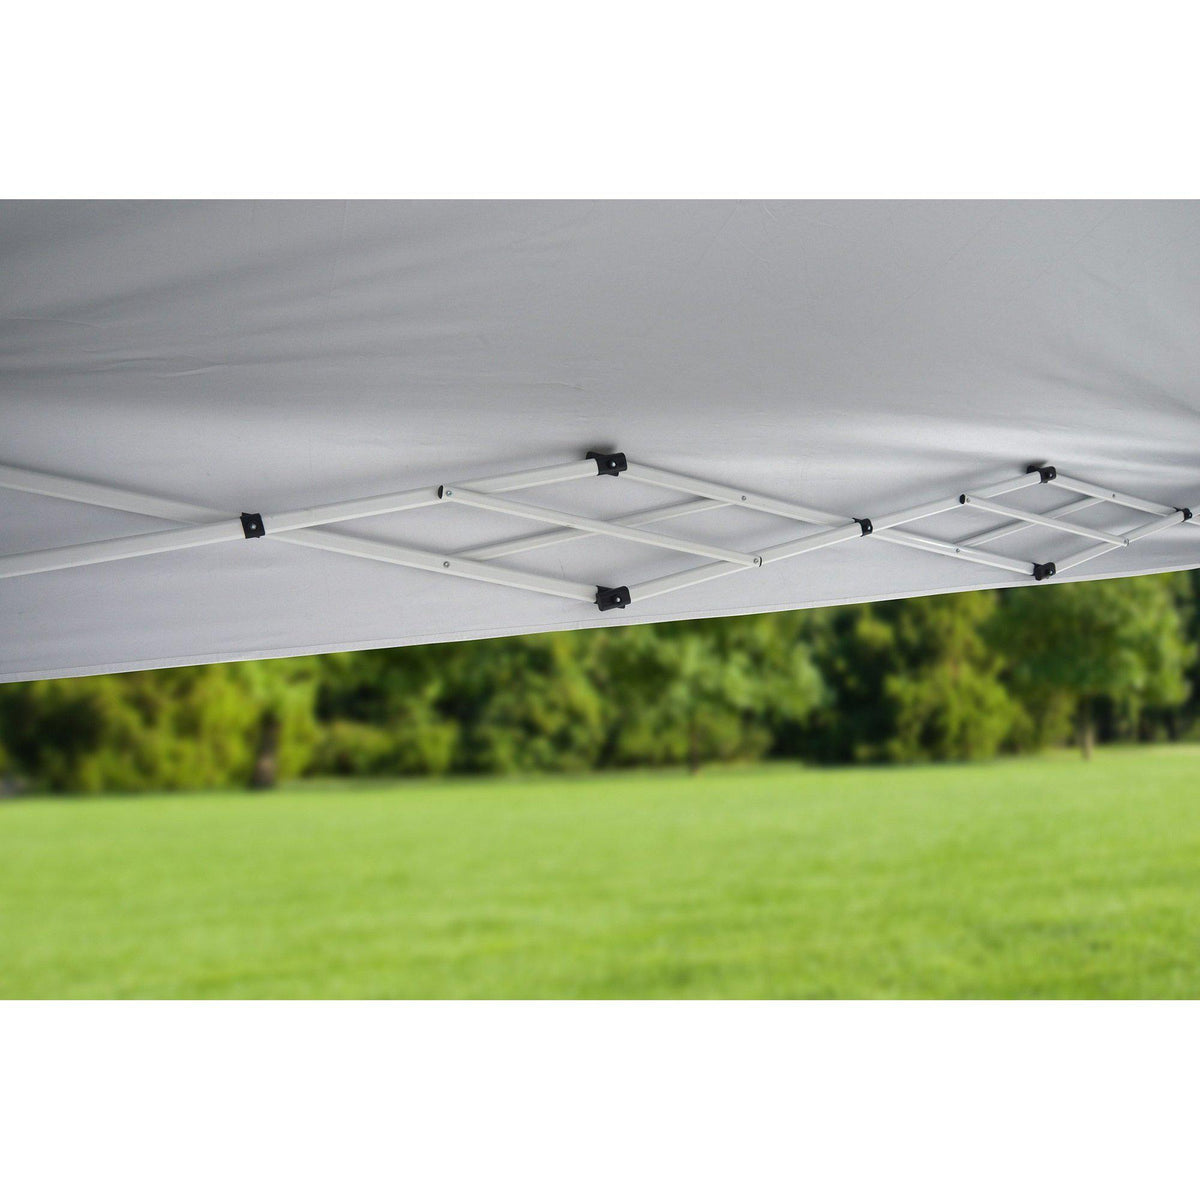 Quik Shade Commercial 10 x 10 ft. Straight Leg Canopy, White